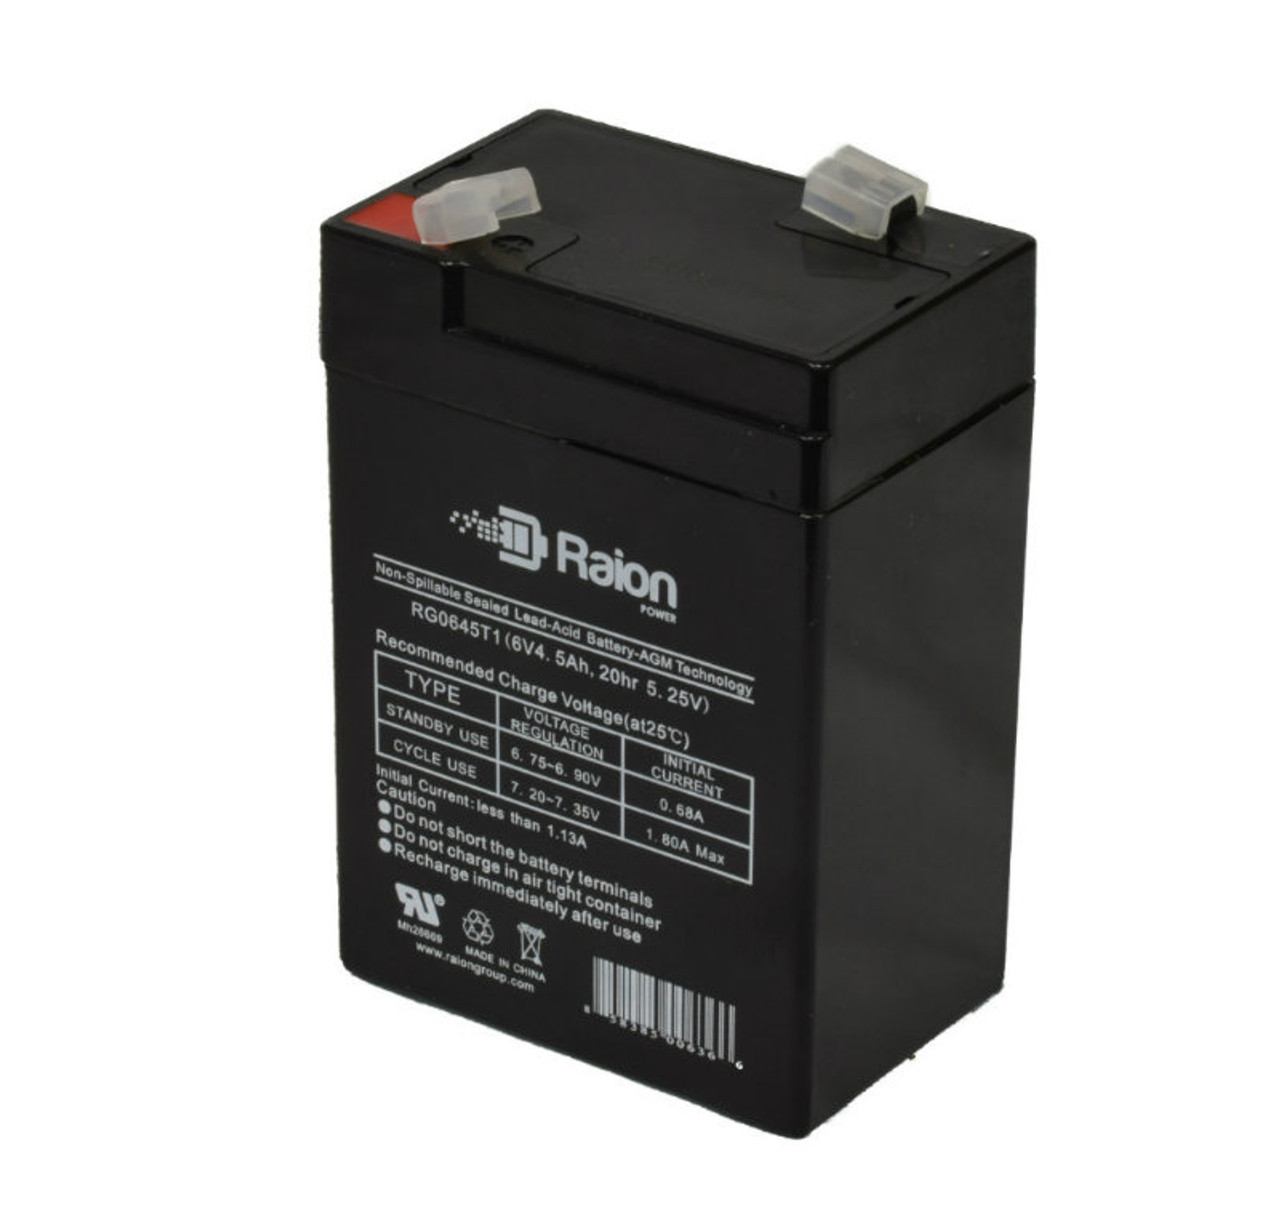 Raion Power RG0645T1 6V 4.5Ah Replacement Battery Cartridge for Little Tikes H3 Hummer